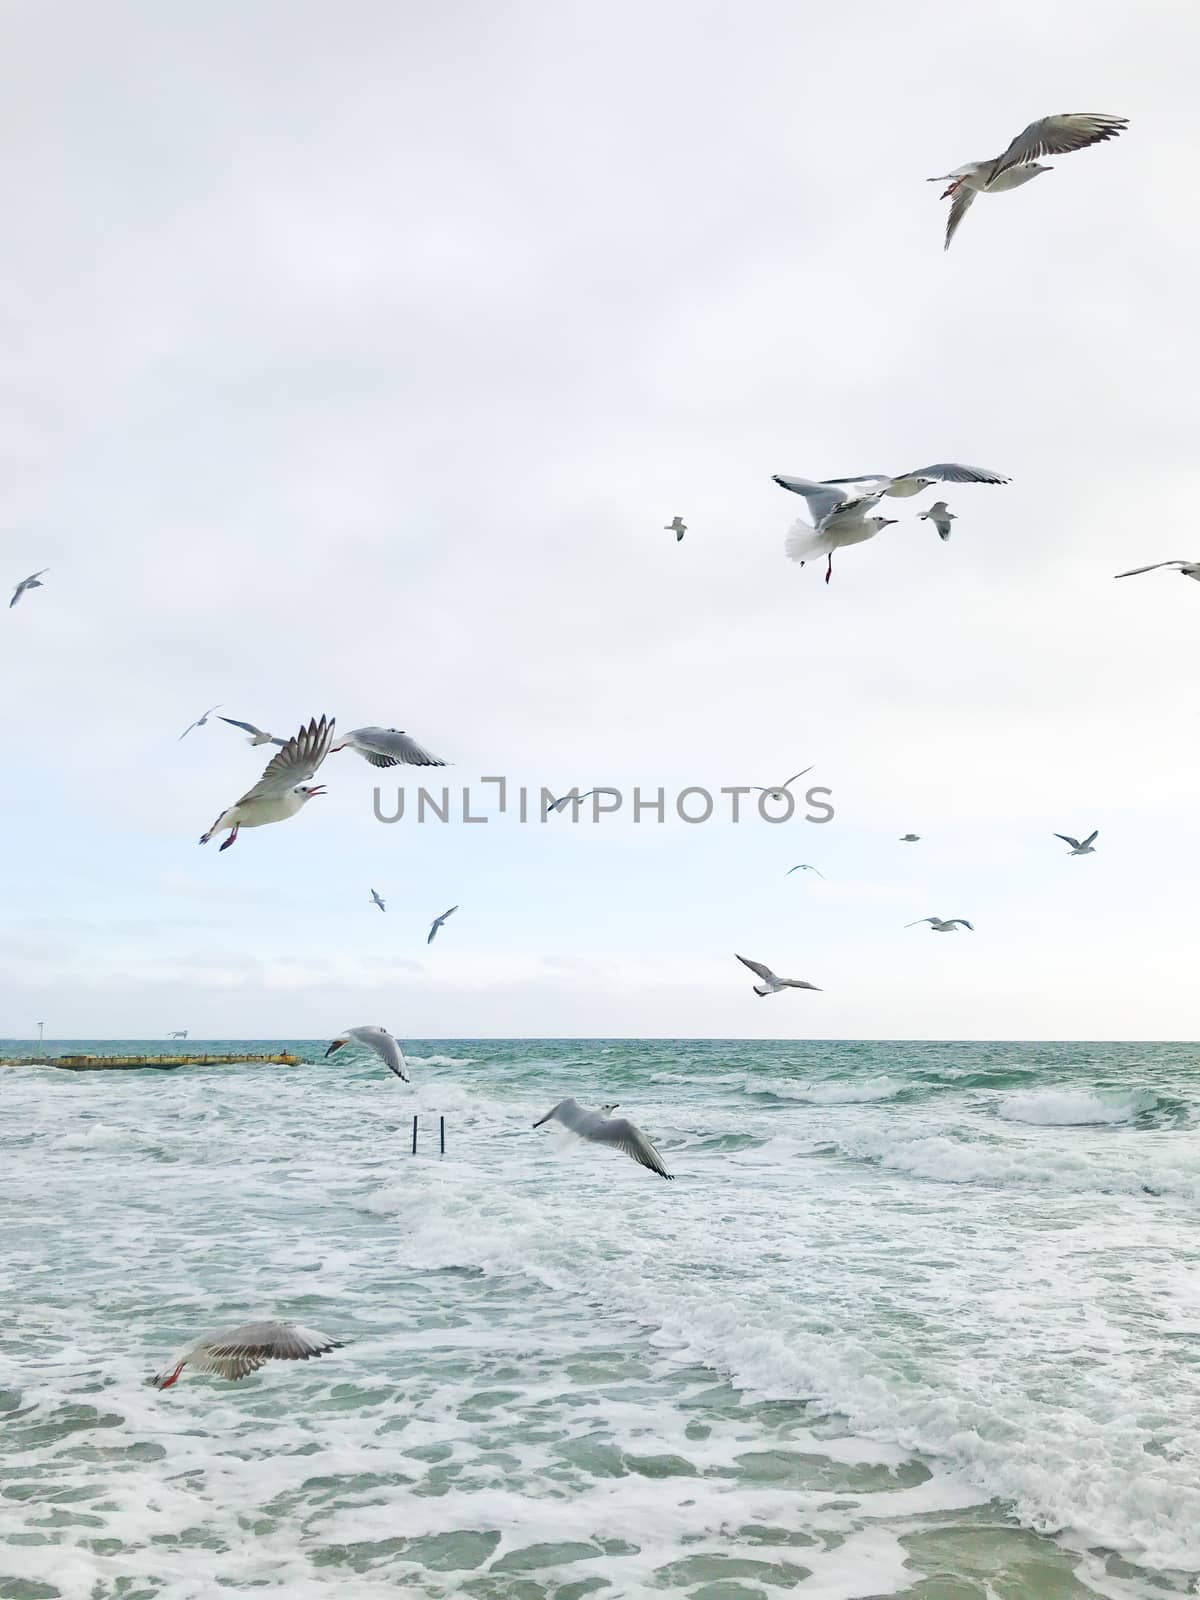 Seagulls Flying Over Sea by nenovbrothers